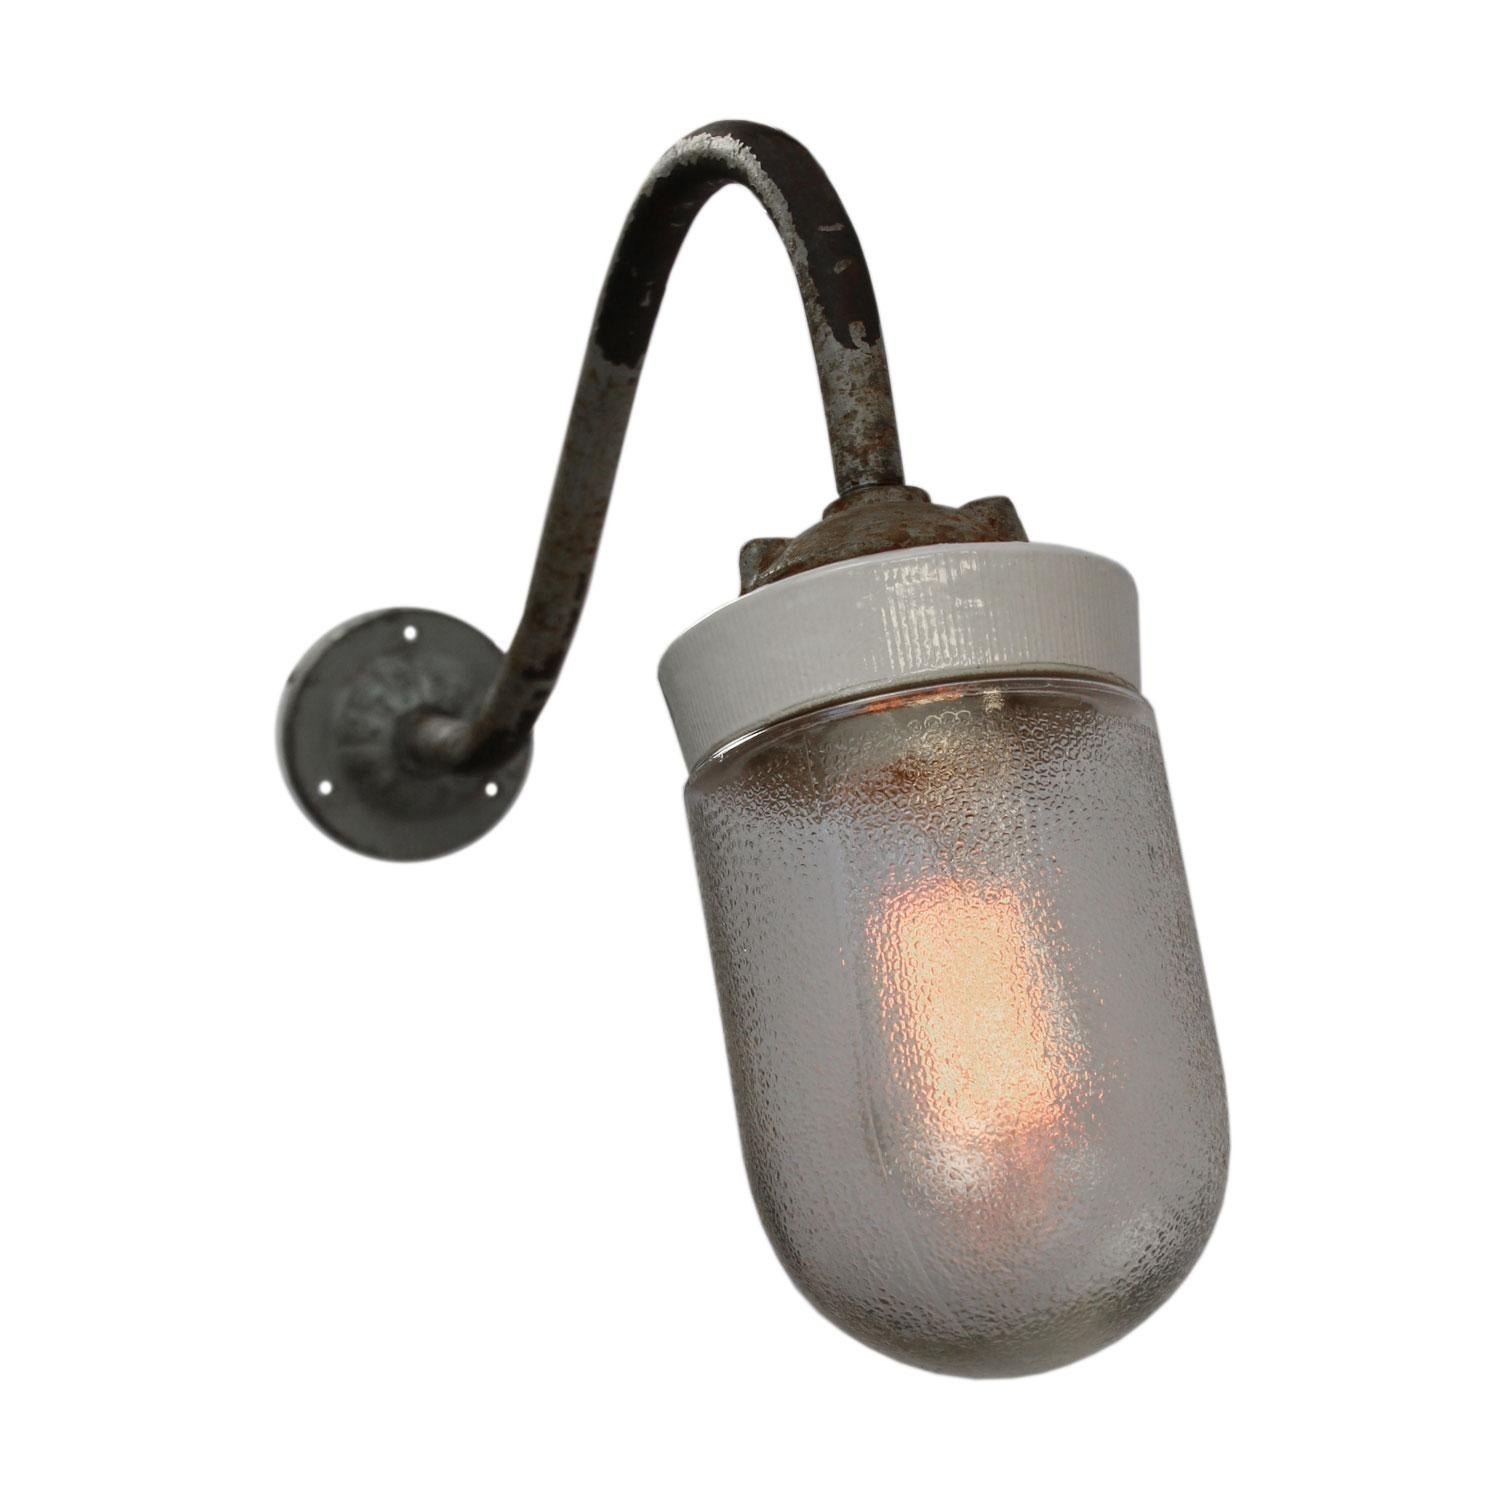 Industrial wall light.
Cast iron and porcelain top, frosted glass.
Diameter cast iron wall mount: 9 cm, 3 holes to secure.

Weight: 2.00 kg / 4.4 lb

Priced per individual item. All lamps have been made suitable by international standards for